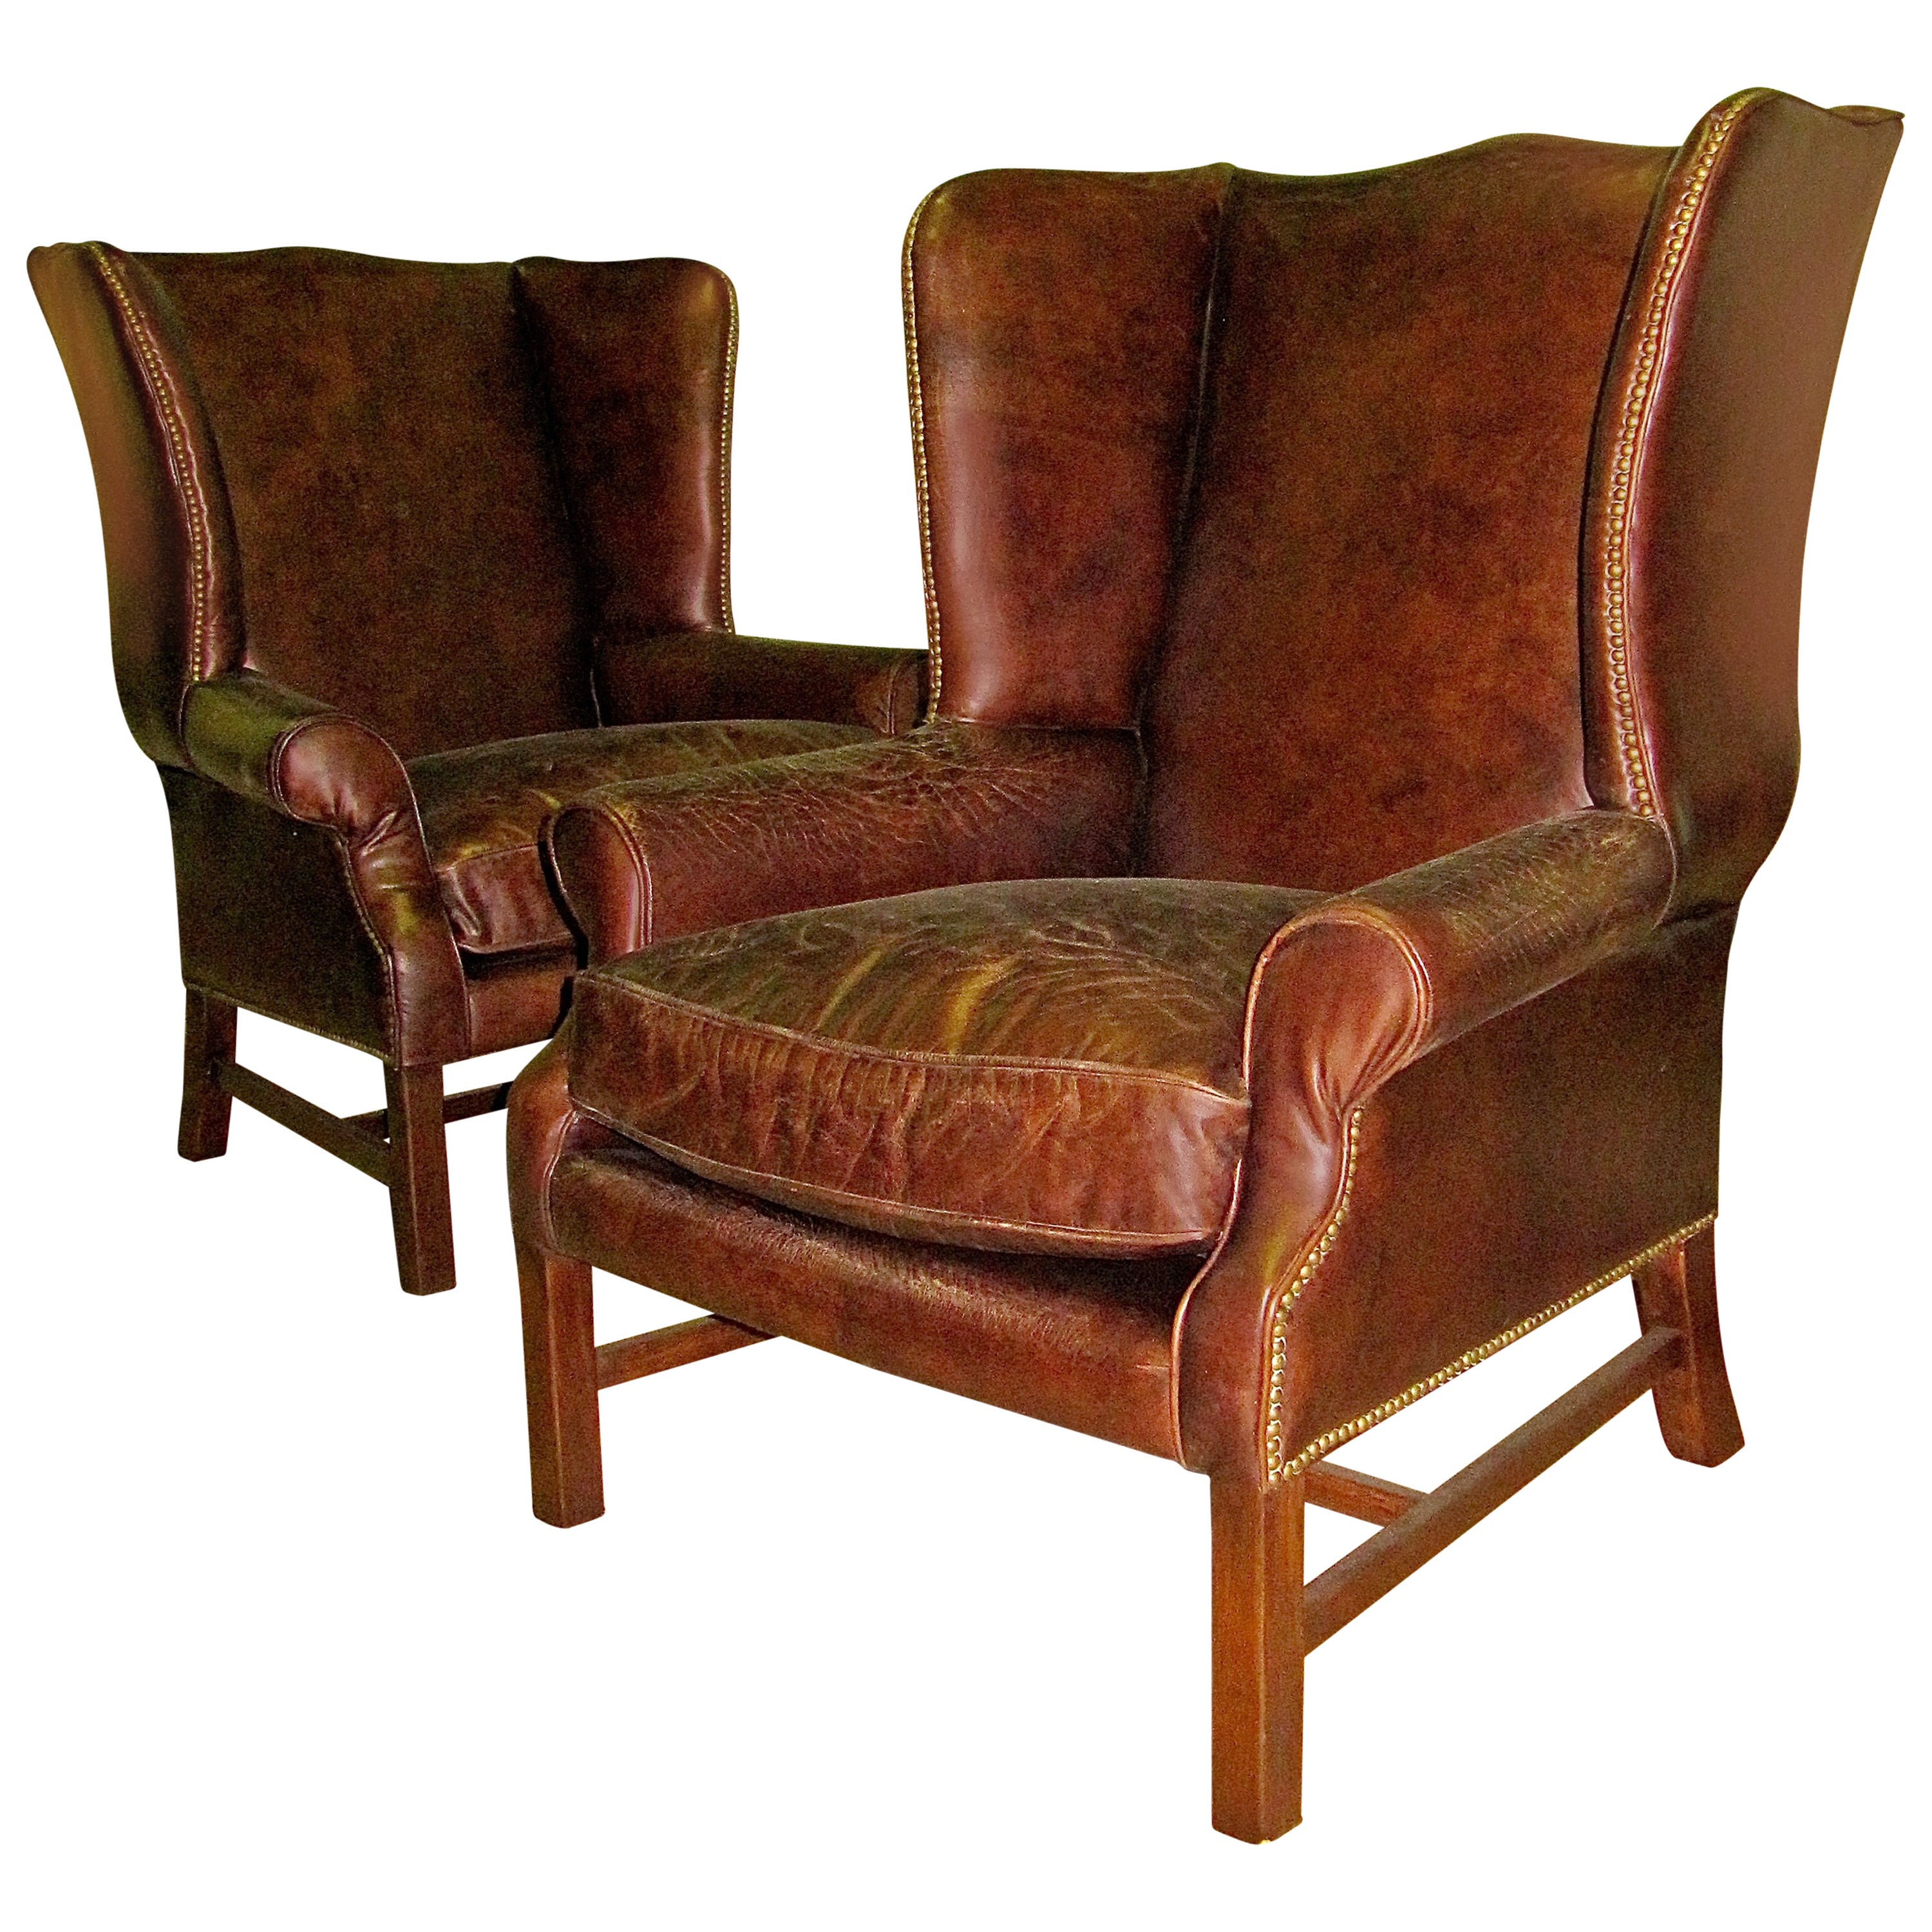 Wingback Chairs With Distressed Leather, Distressed Leather Armchair